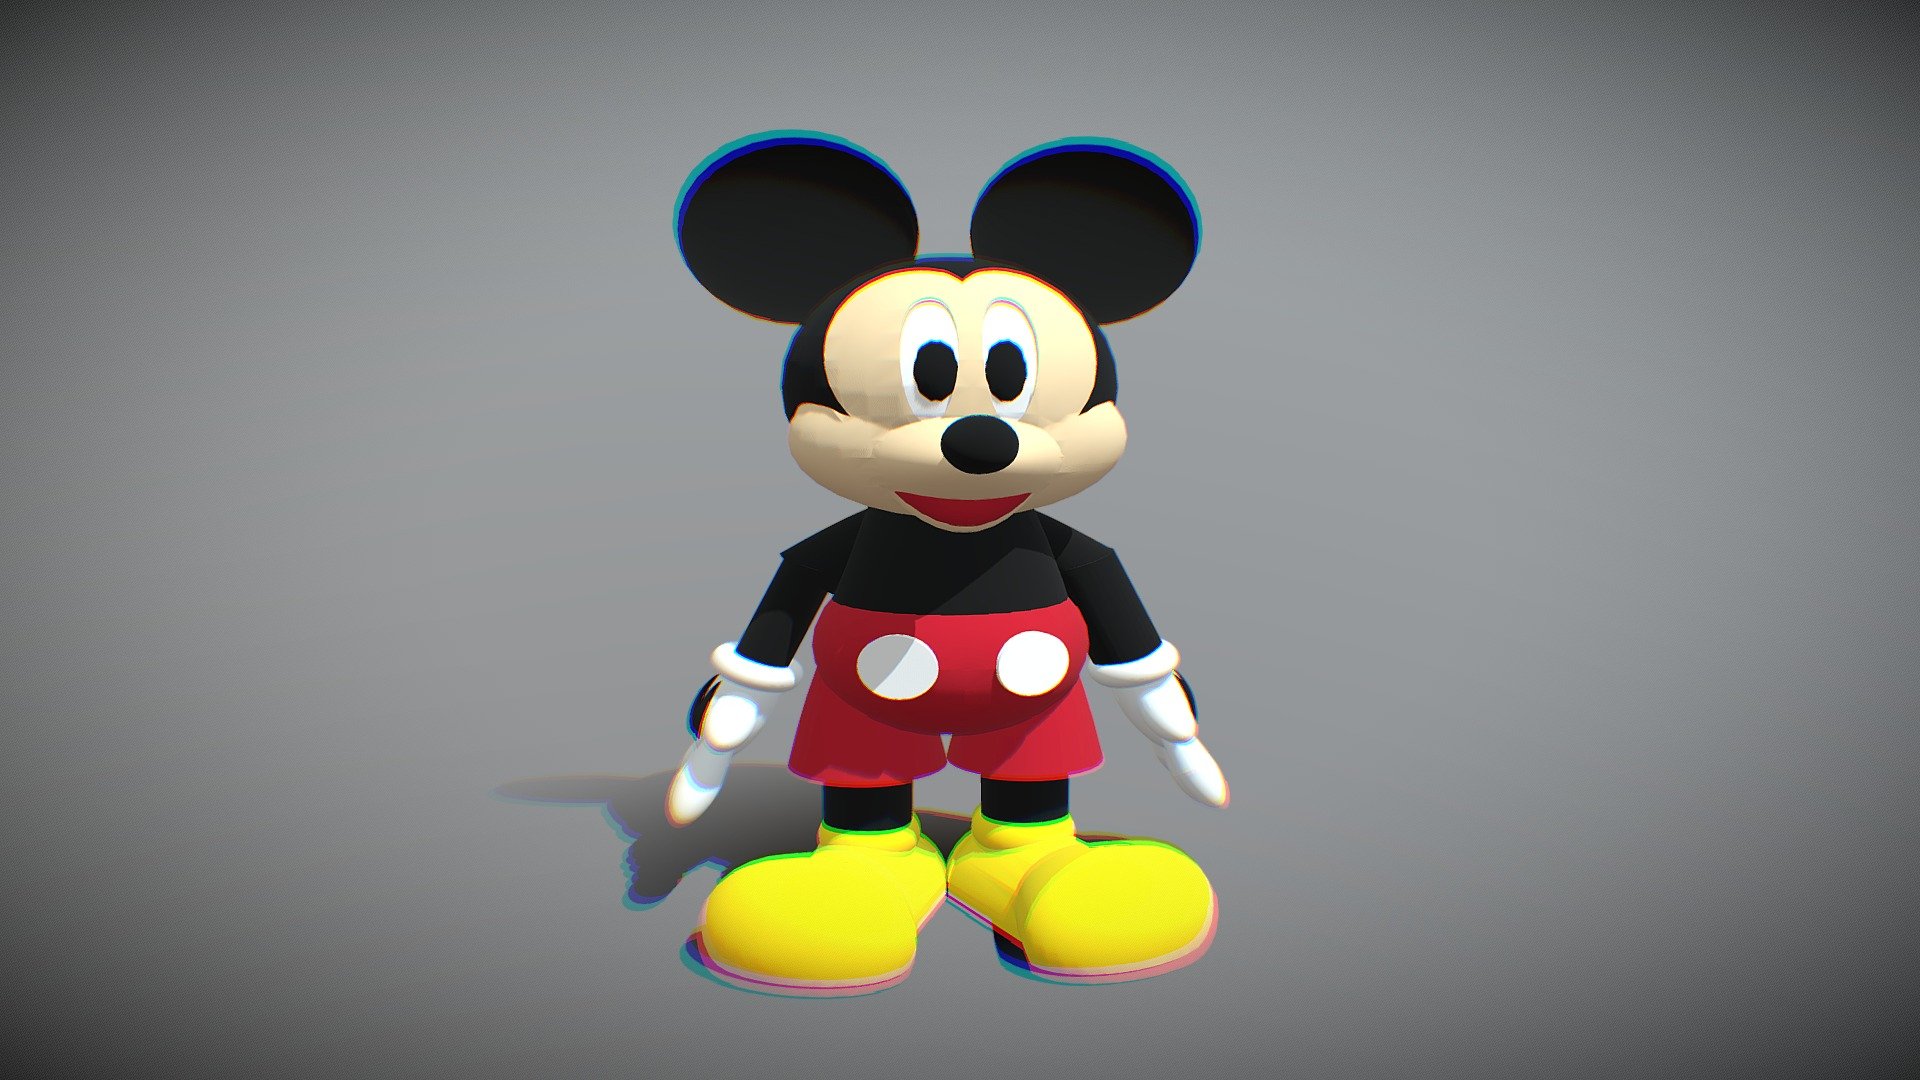 Tratar Contestar el teléfono hecho Mickey Mouse - Download Free 3D model by ukthegamerfnf2003thecool2022fan  (@ukthegamerfnf2003) [c067d3d]